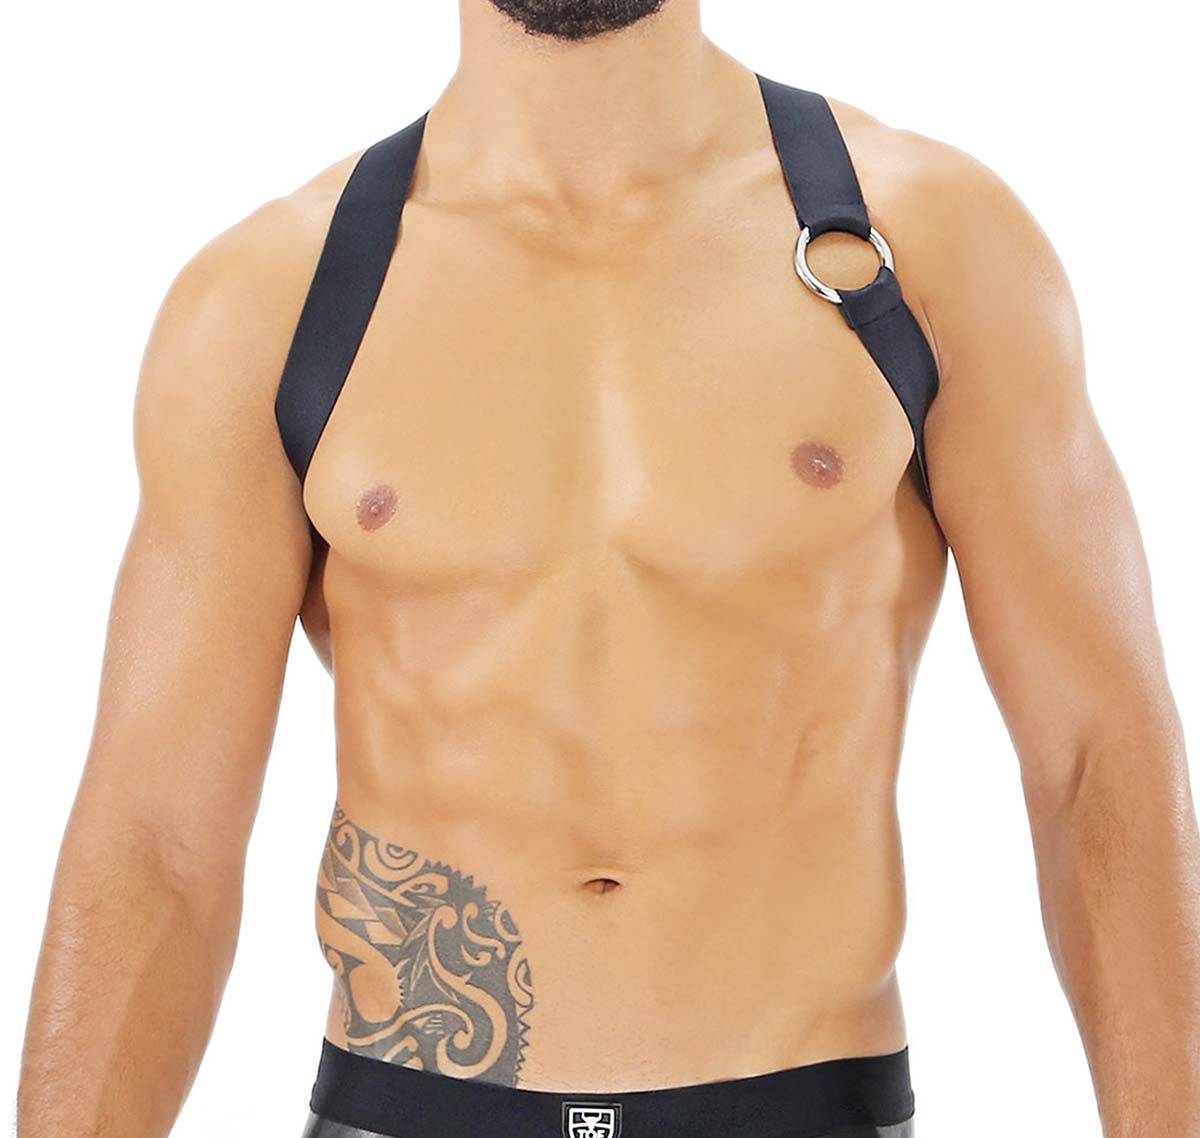 TOF Imbracatura PARTY BOY ELASTIC HARNESS BLACK H0018N, nero